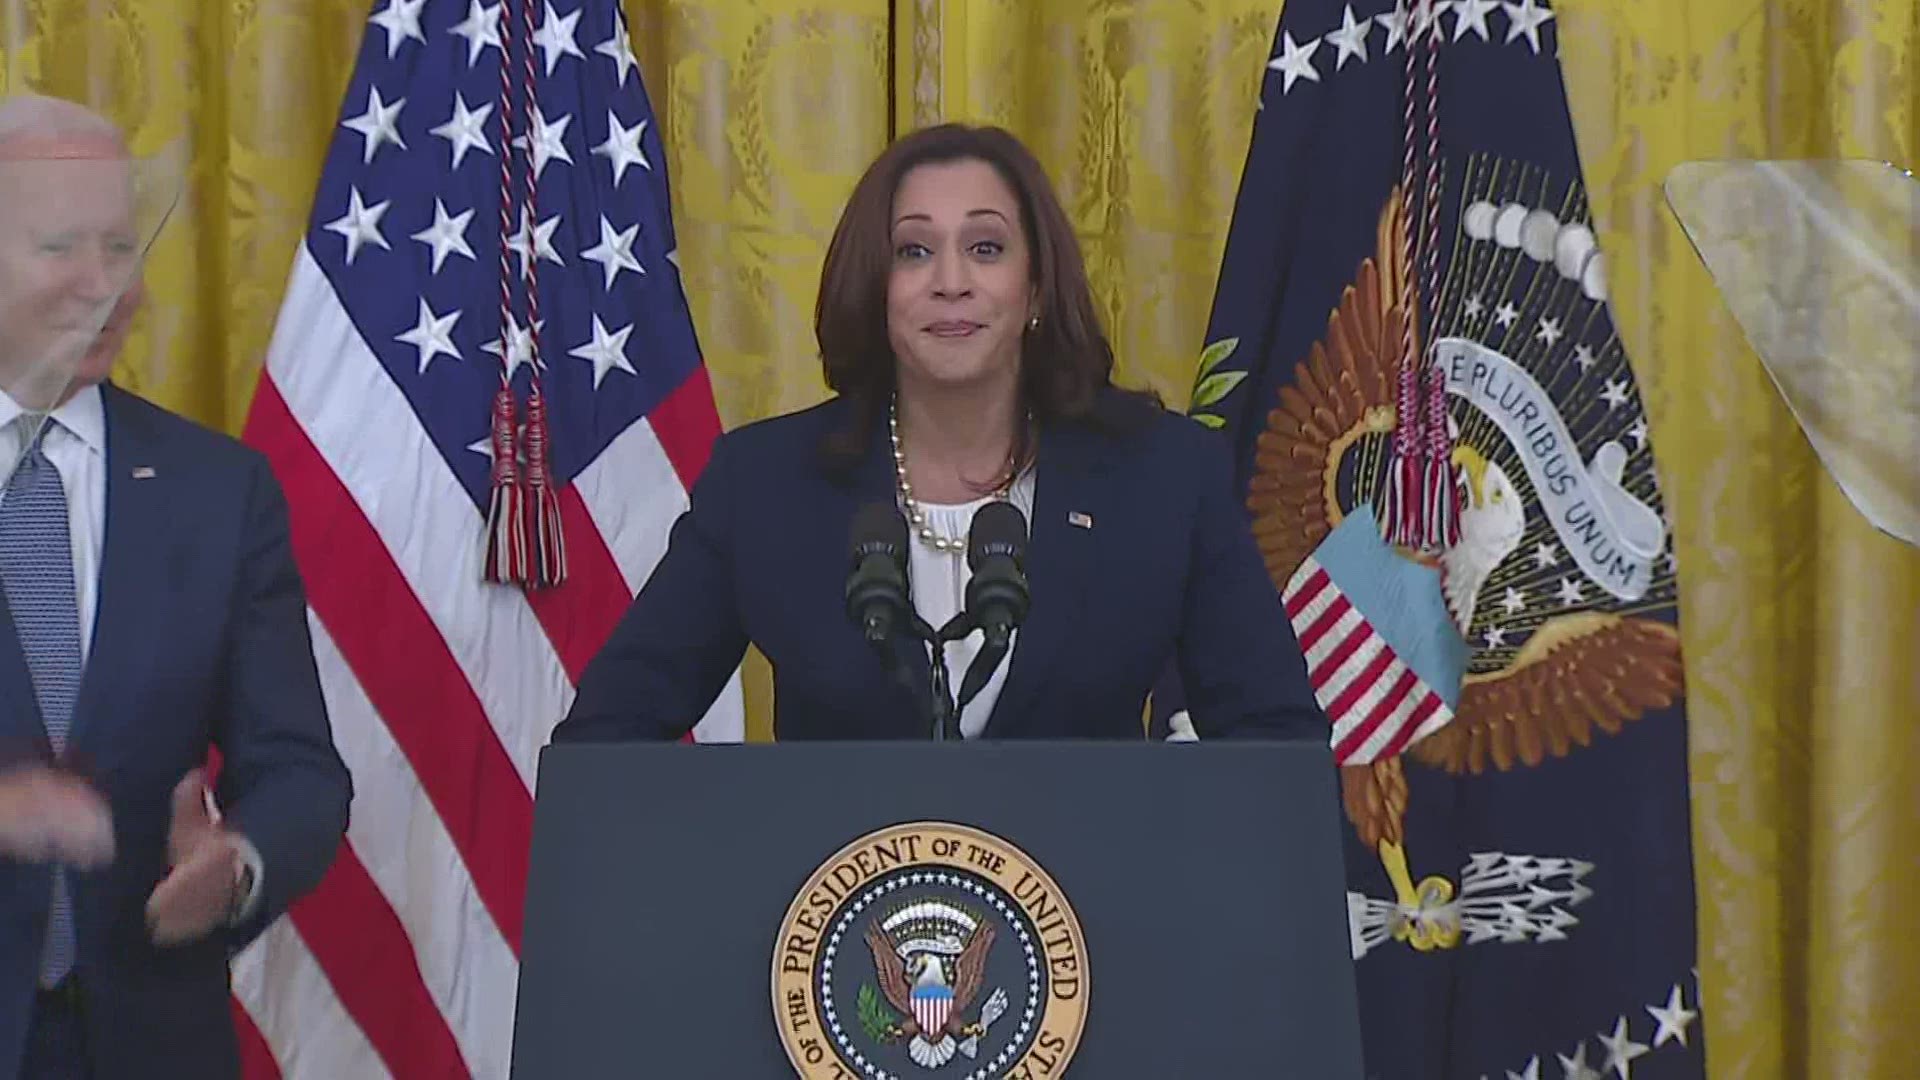 Speaking in the East Room, US Vice President Kamala Harris talked about the "many names" Juneteenth has been known as, adding "National Holiday" to the list.